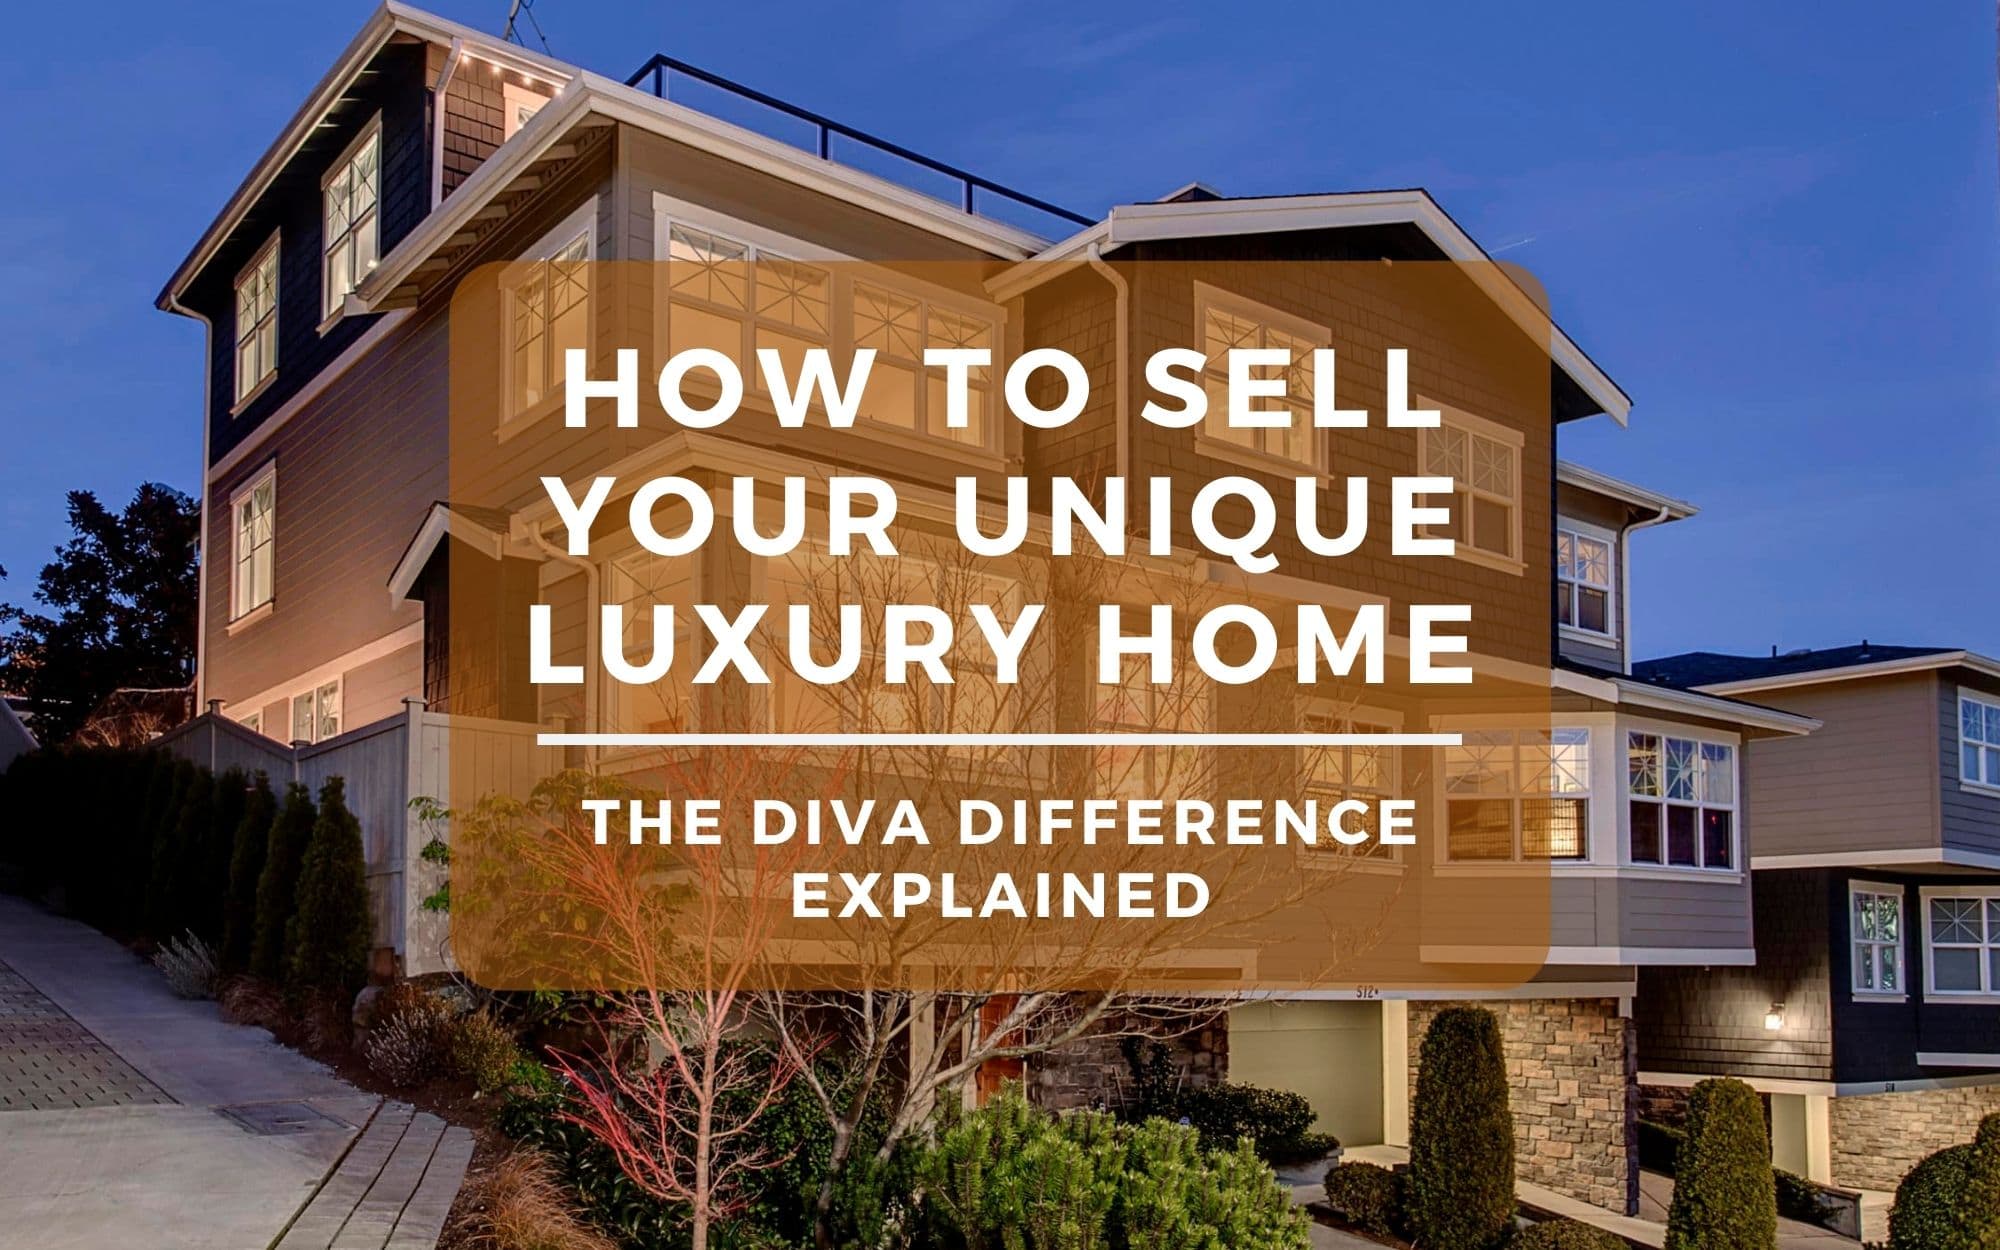 How To Sell A Unique Luxury Home In Seattle: The Diva Difference Explained